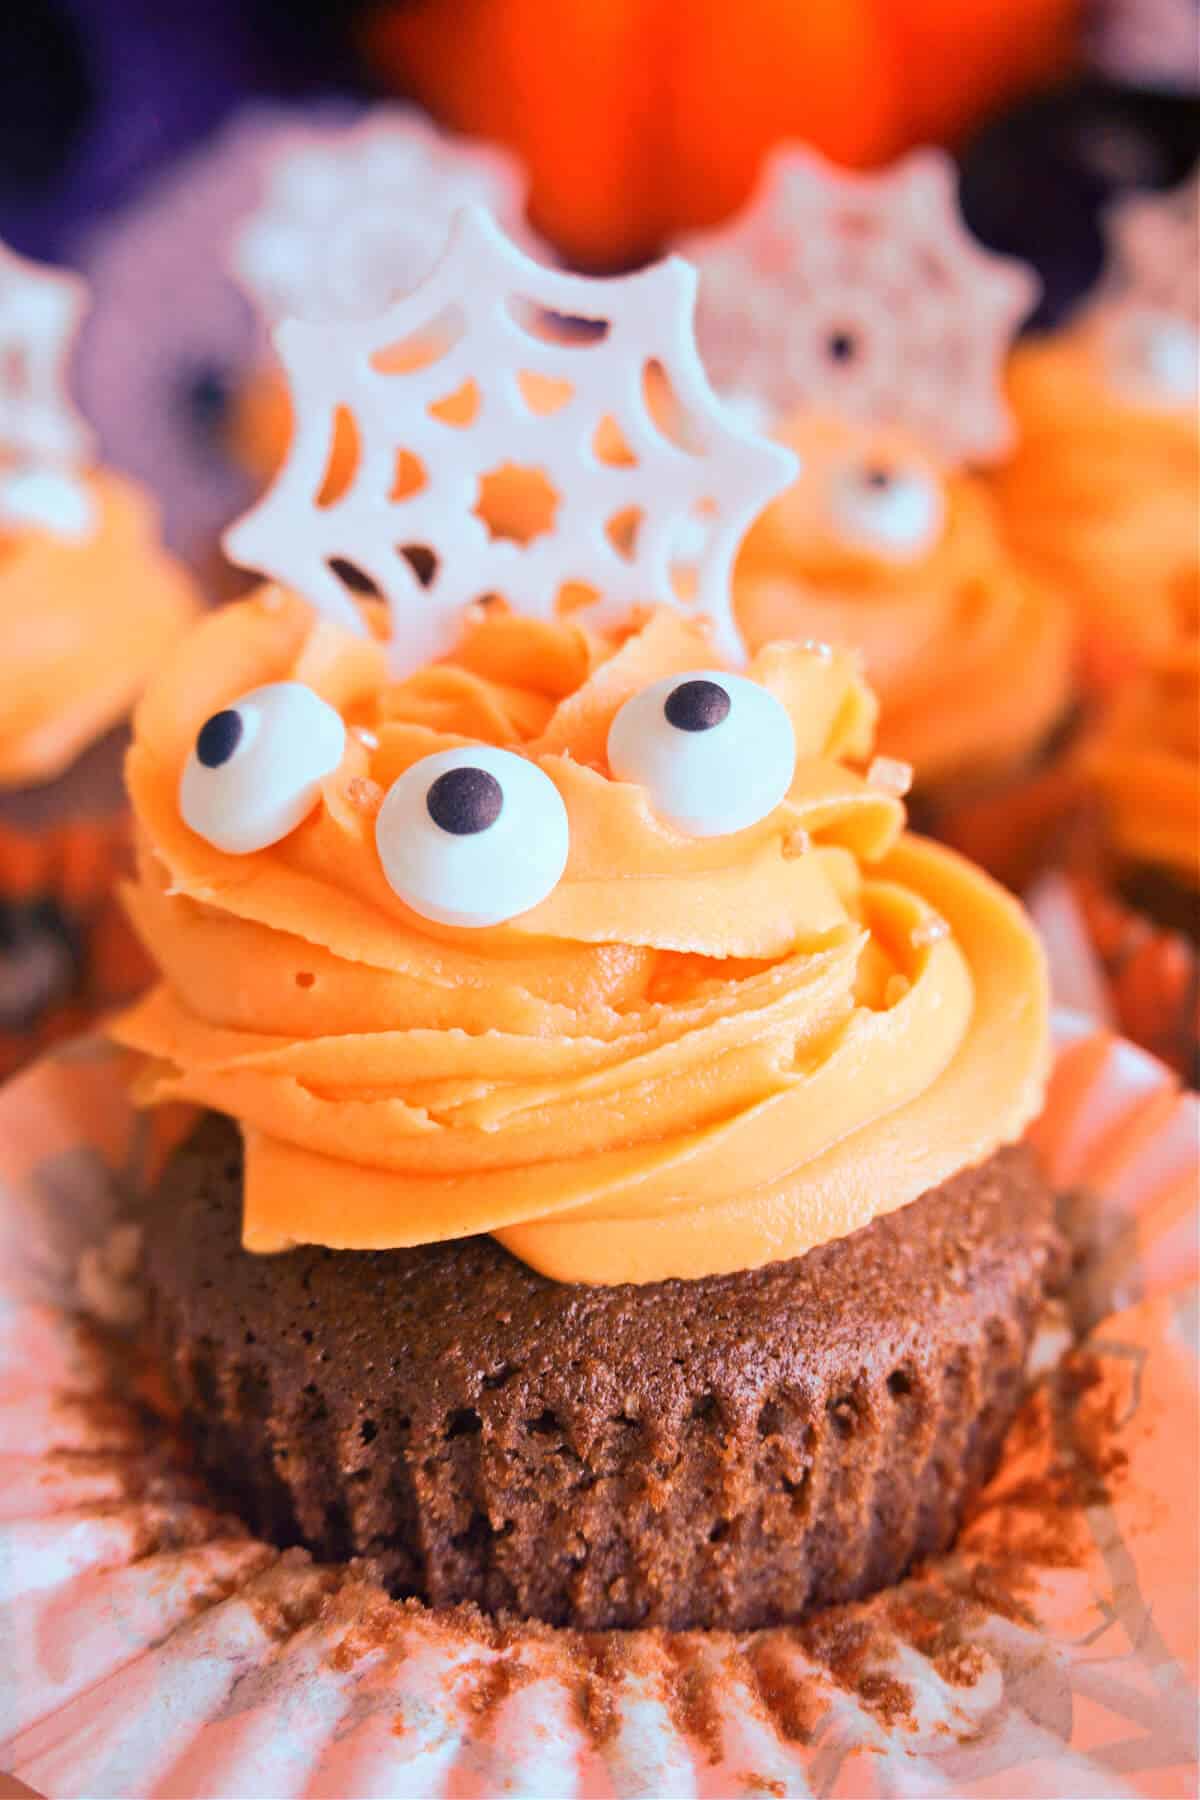 Close-up shoot of a cupcake with chocolate sponge and orange frosting